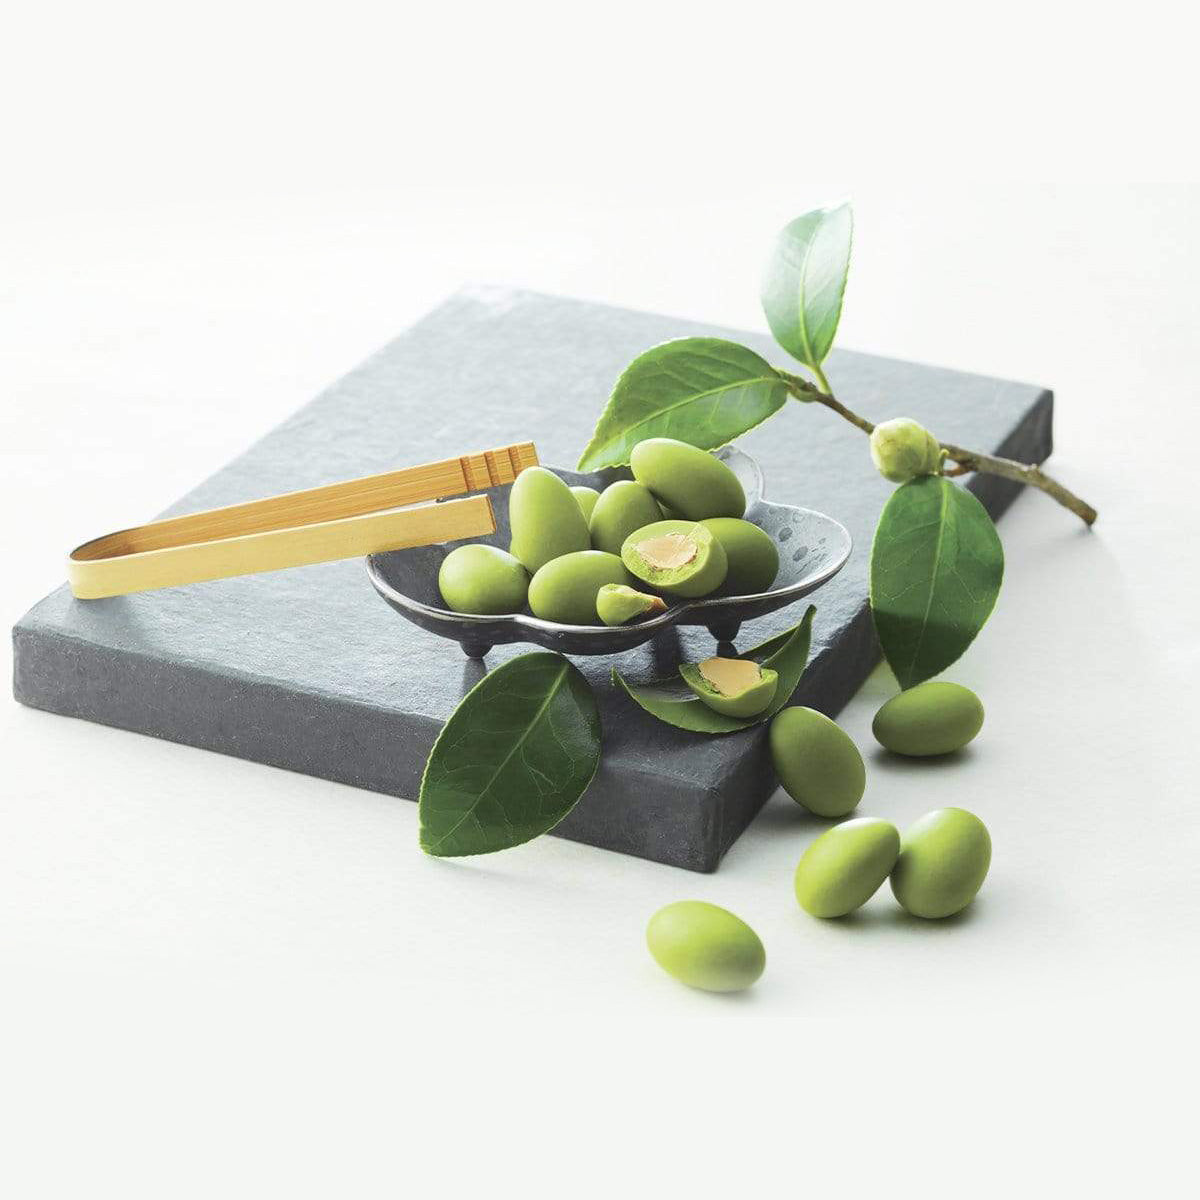 ROYCE' Chocolate - Matcha Almond Chocolate - Image shows round green chocolate-coated almonds on a gray plate and gray stone platform. Accents include a yellow wooden tong and some green leaves and stems. Background is in white.